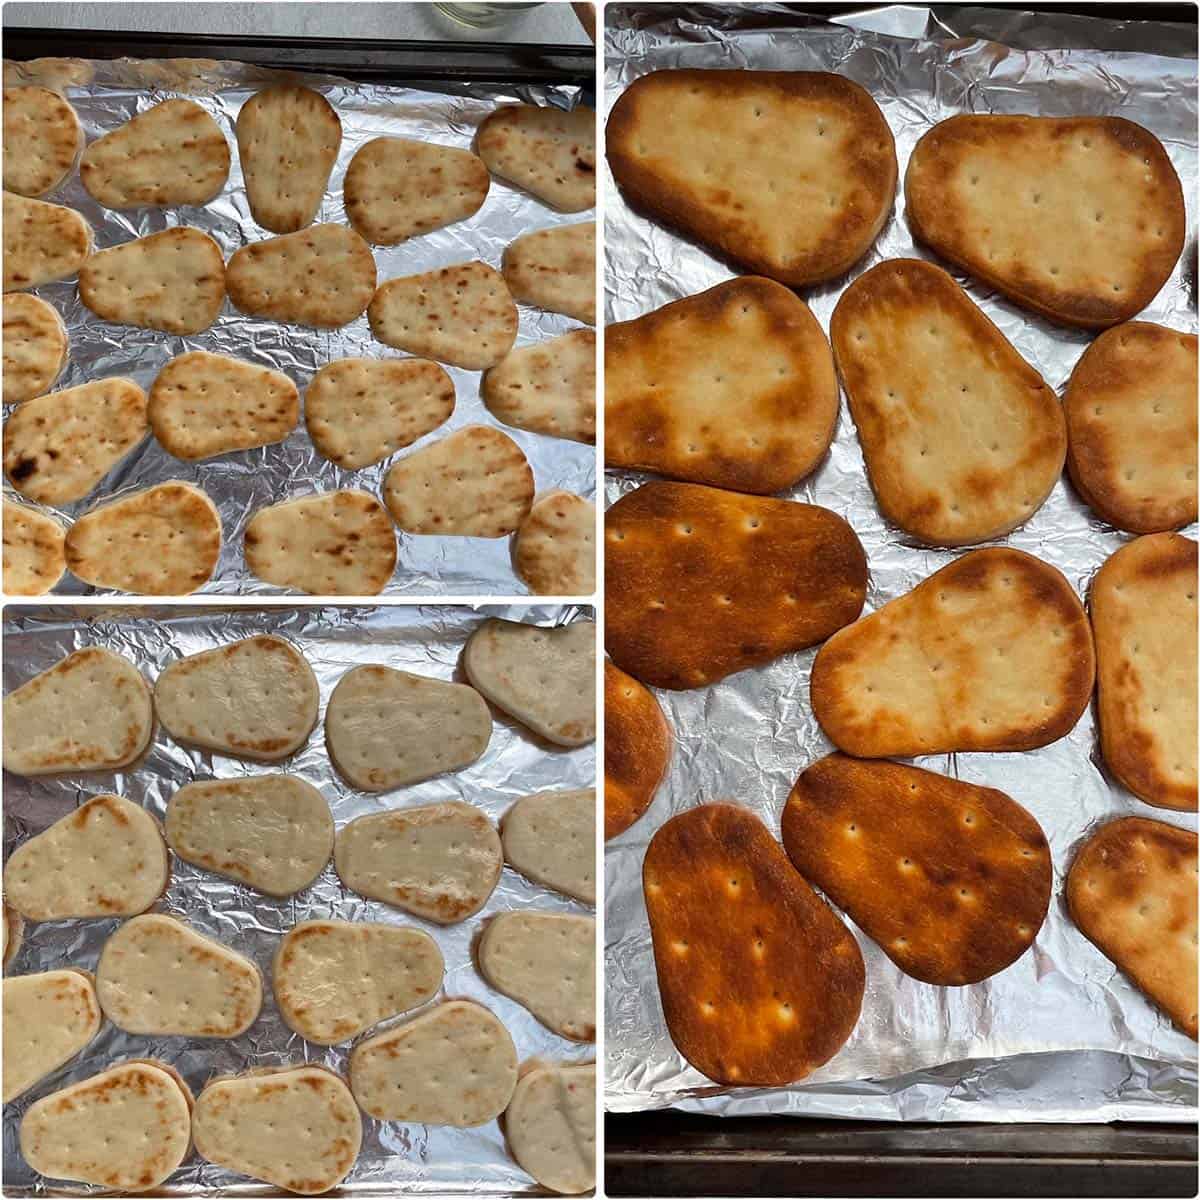 3 panel photo showing the original, oiled and baked naan chips.